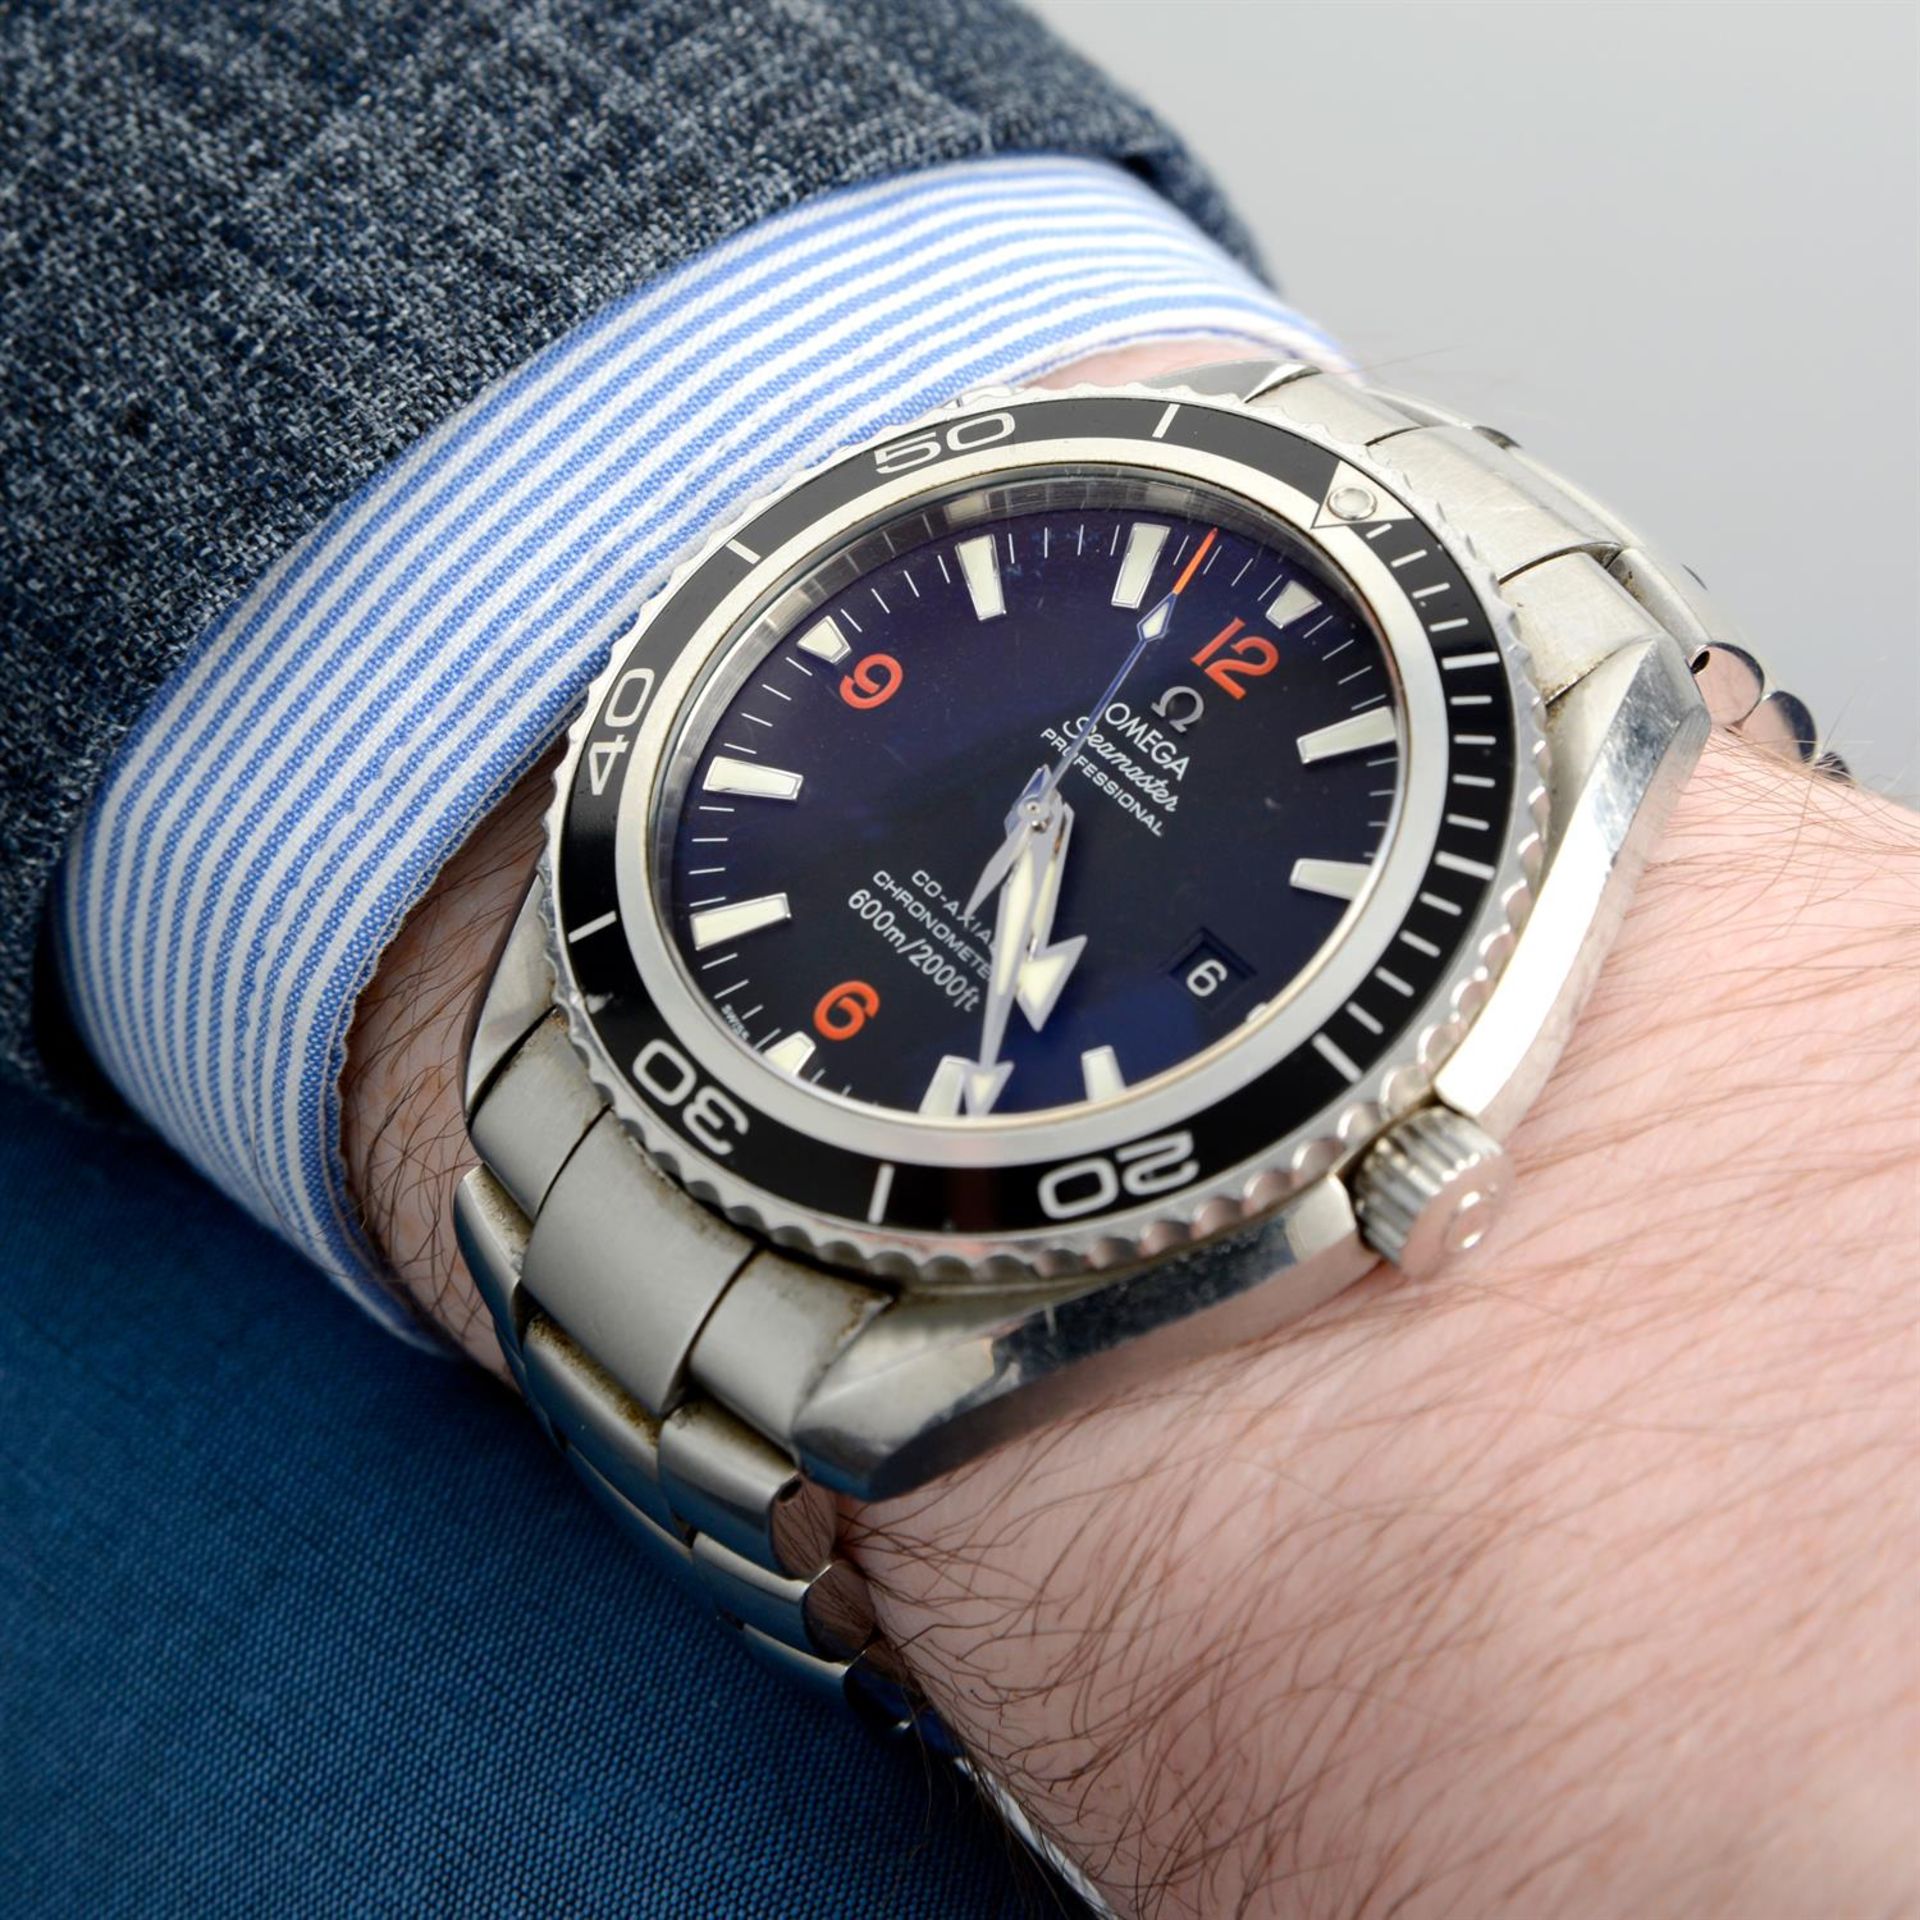 Omega - a Seamaster Planet Ocean watch, 45mm. - Image 6 of 6